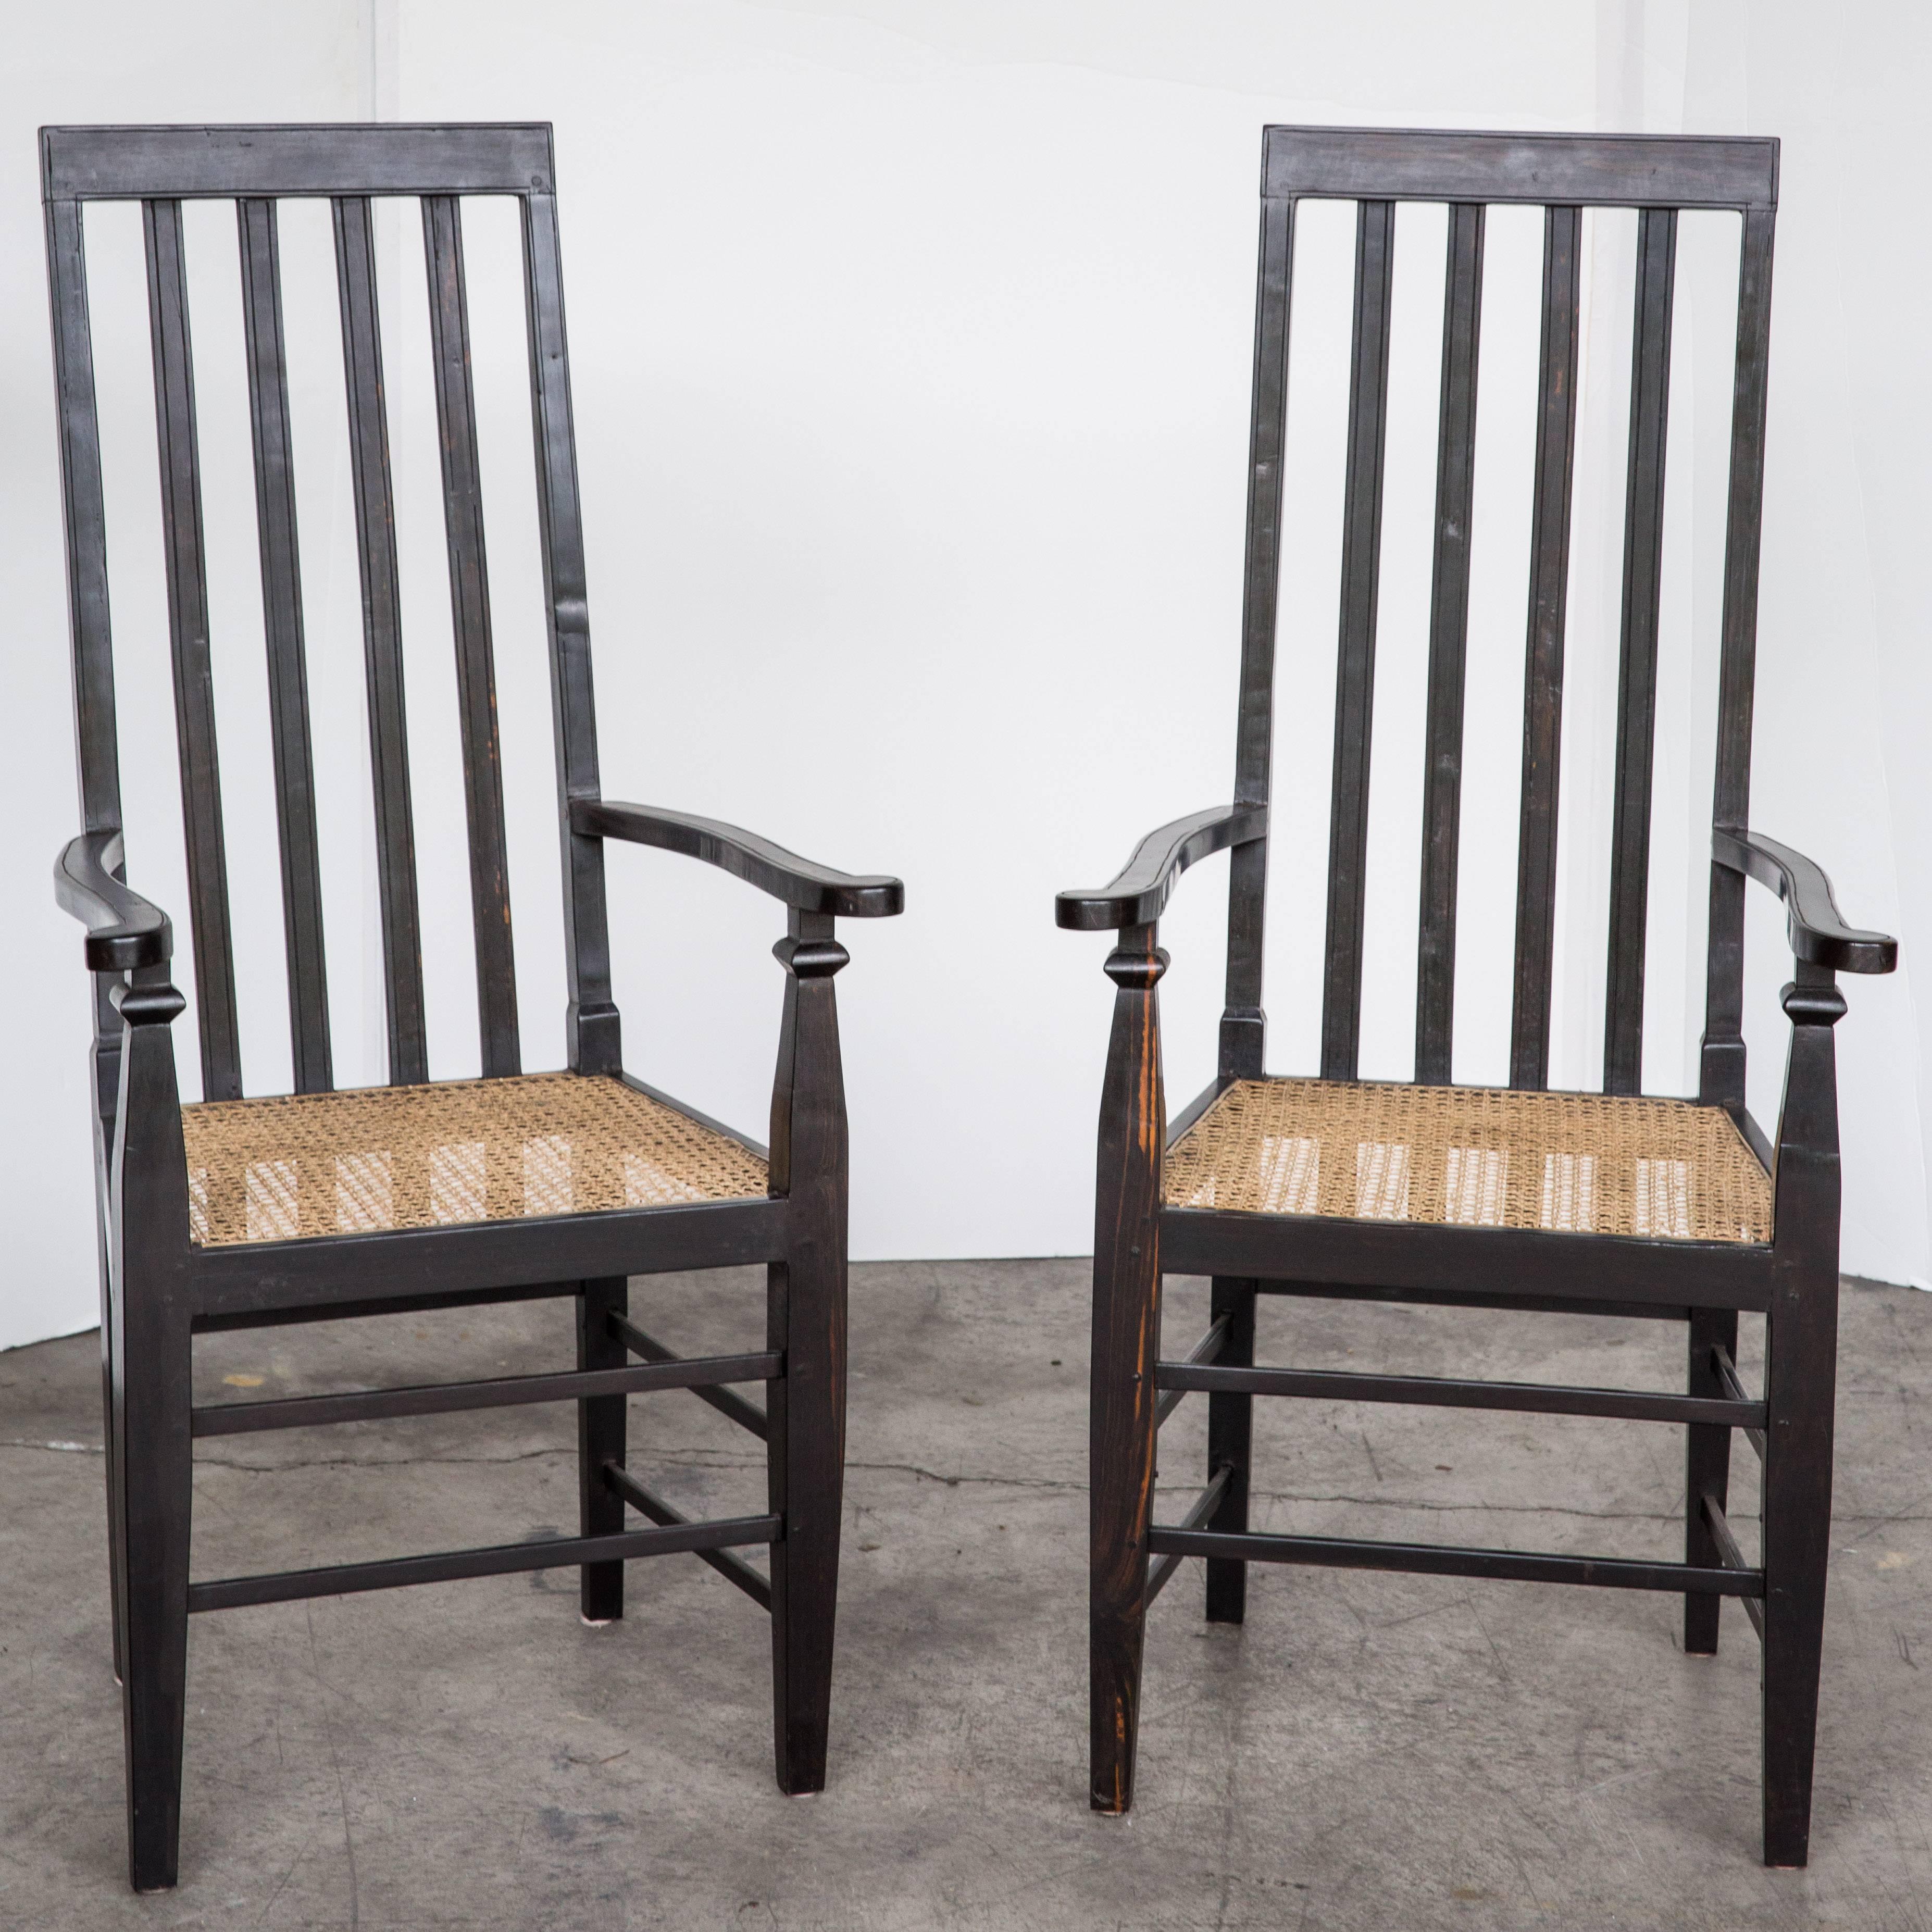 Made of solid ebony with a newly caned seat. The back of the chair is unusually high with a comfortable lean angle. Arms have slight curve with simple straight engraving along the edges. Caning is newly done.